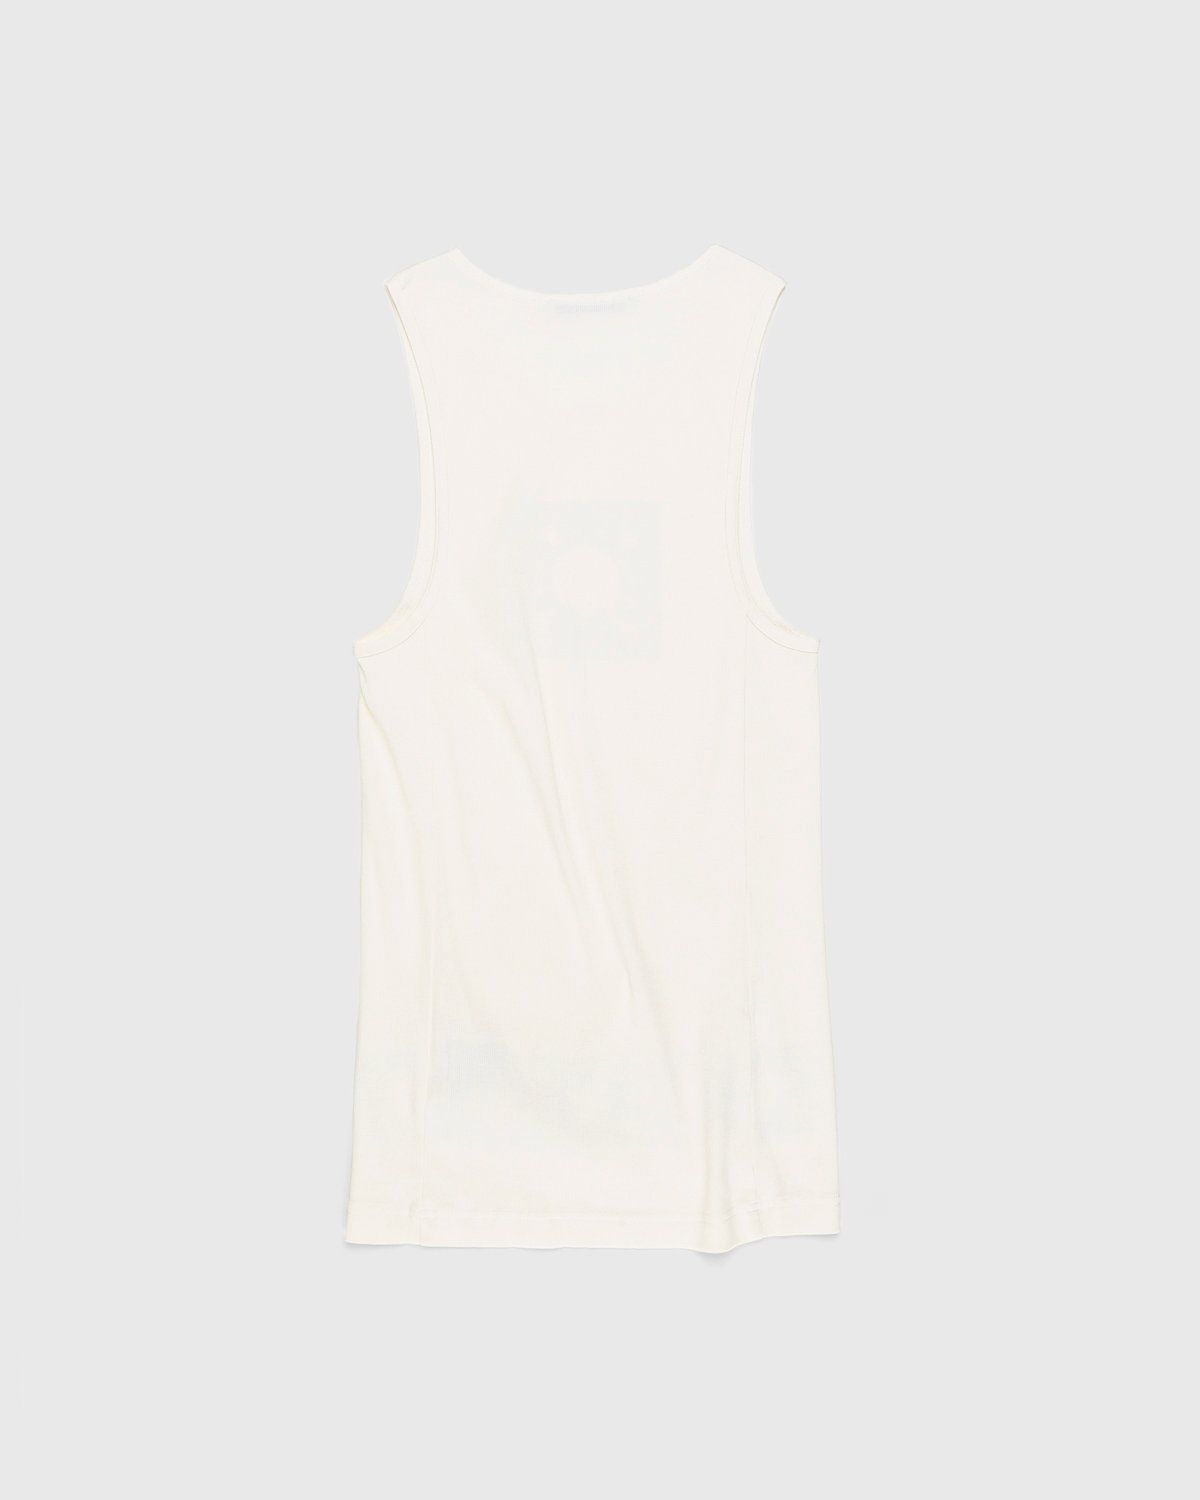 Acne Studios – Ribbed Circus Tank Top Off White - Image 2